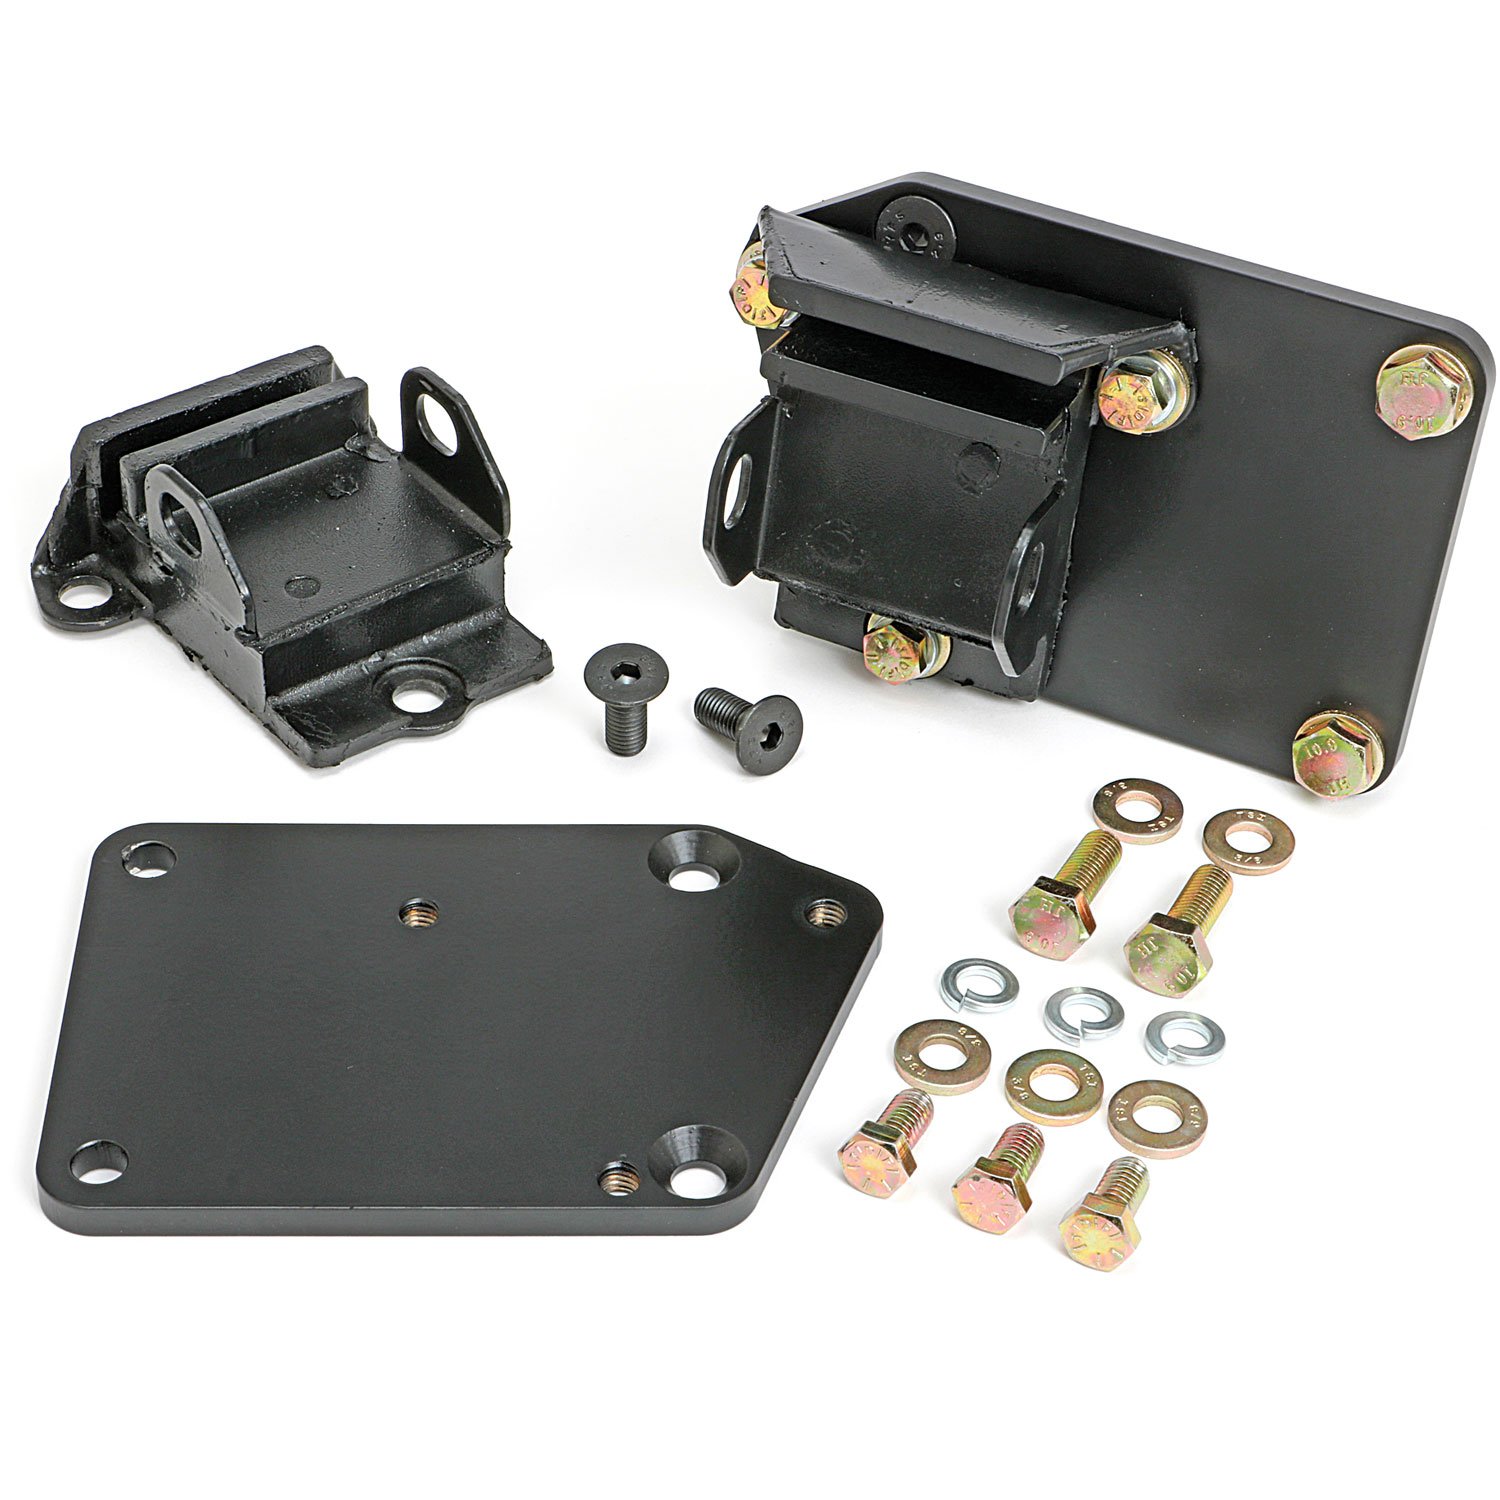 Engine Swap Kit GM LT (Gen 5) into Small Block Chevy Car Chassis